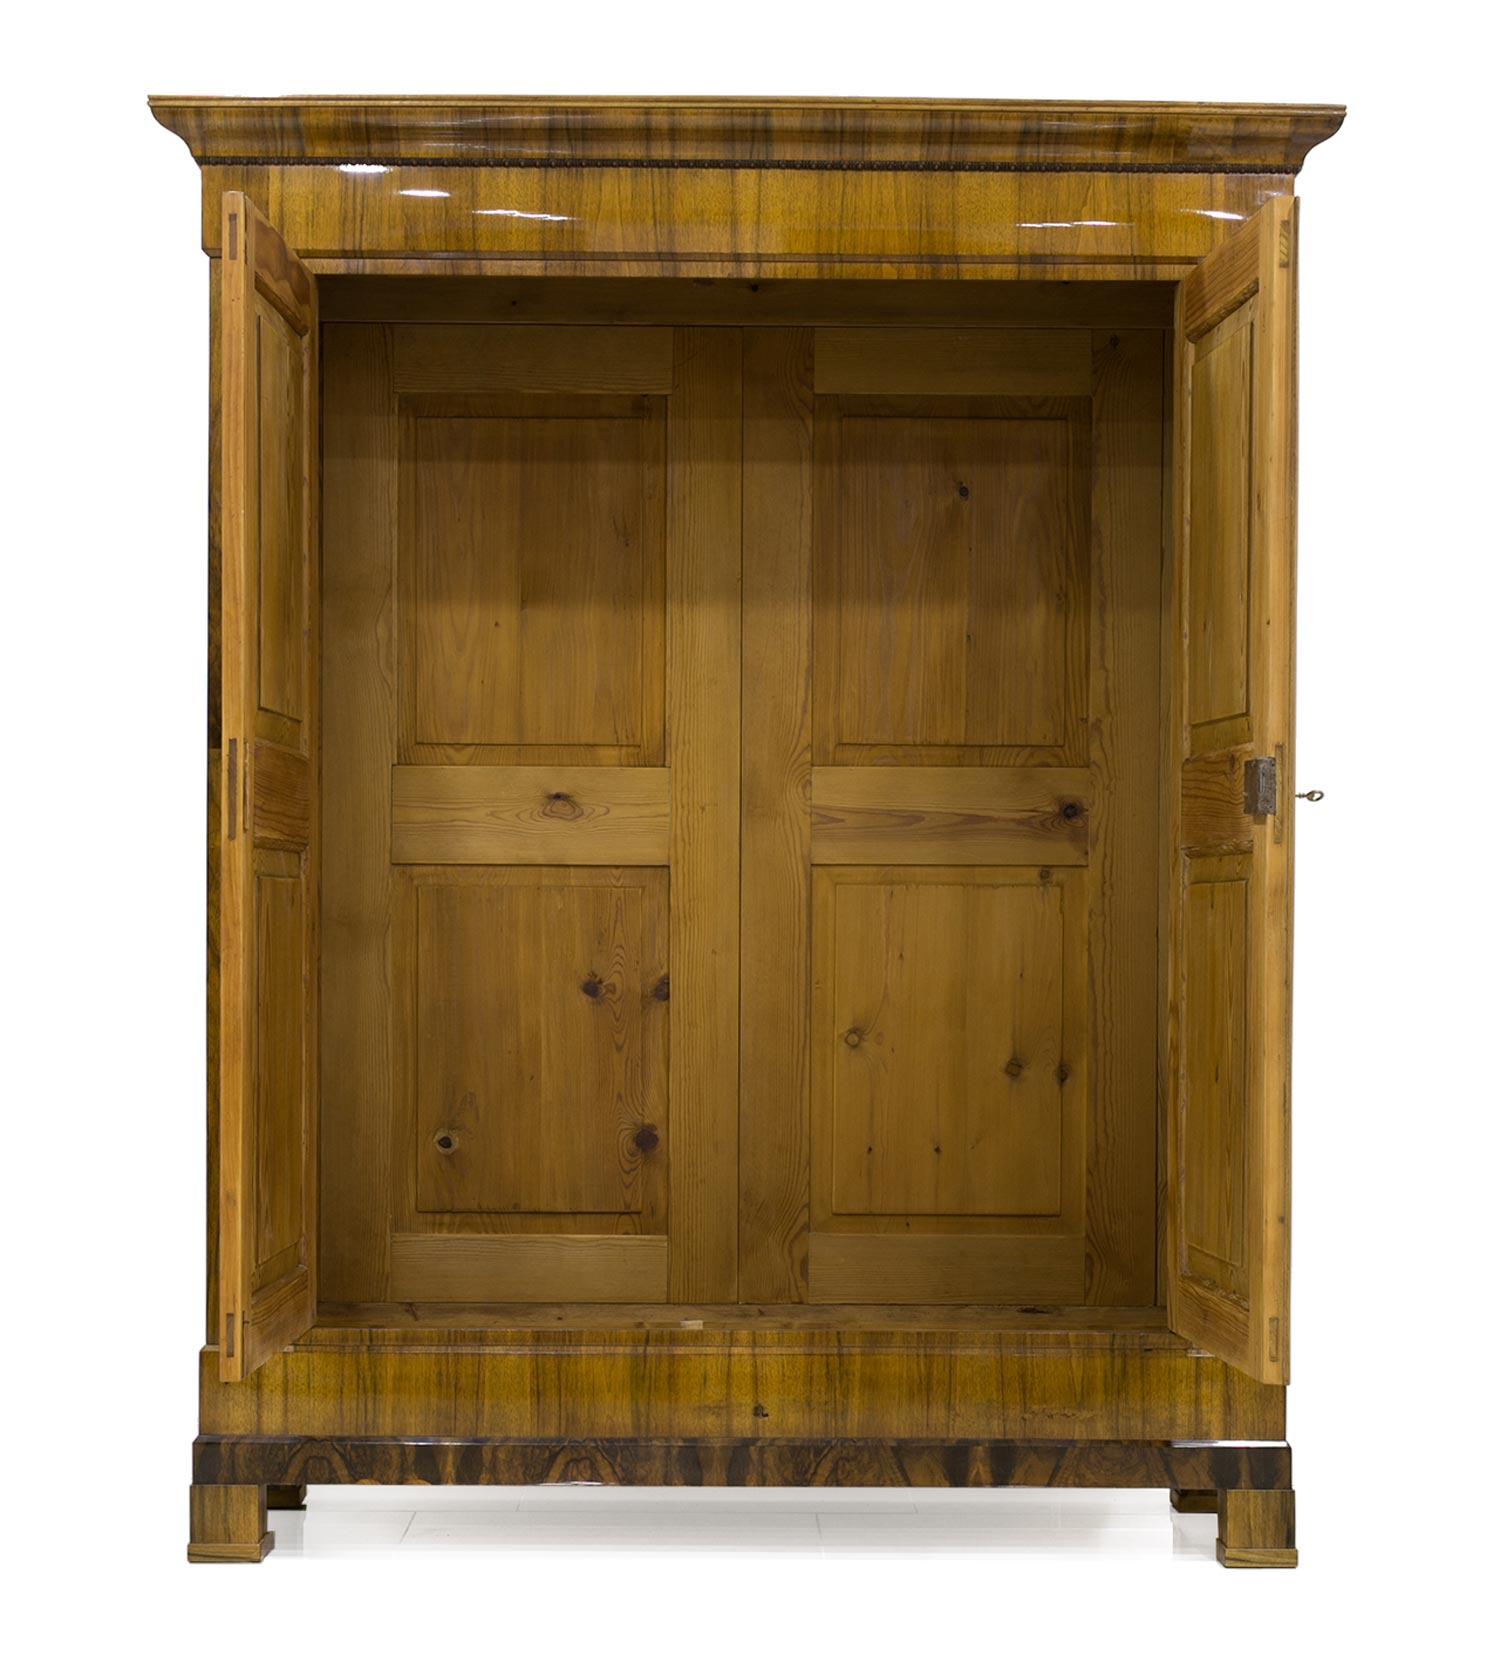 This Biedermeier wardrobe was made circa 1830 and is preserved in very good original condition. The piece was subjected to a very subtle, professional and careful renovation. The wardrobe is made of pine wood, veneered with walnut in a unique